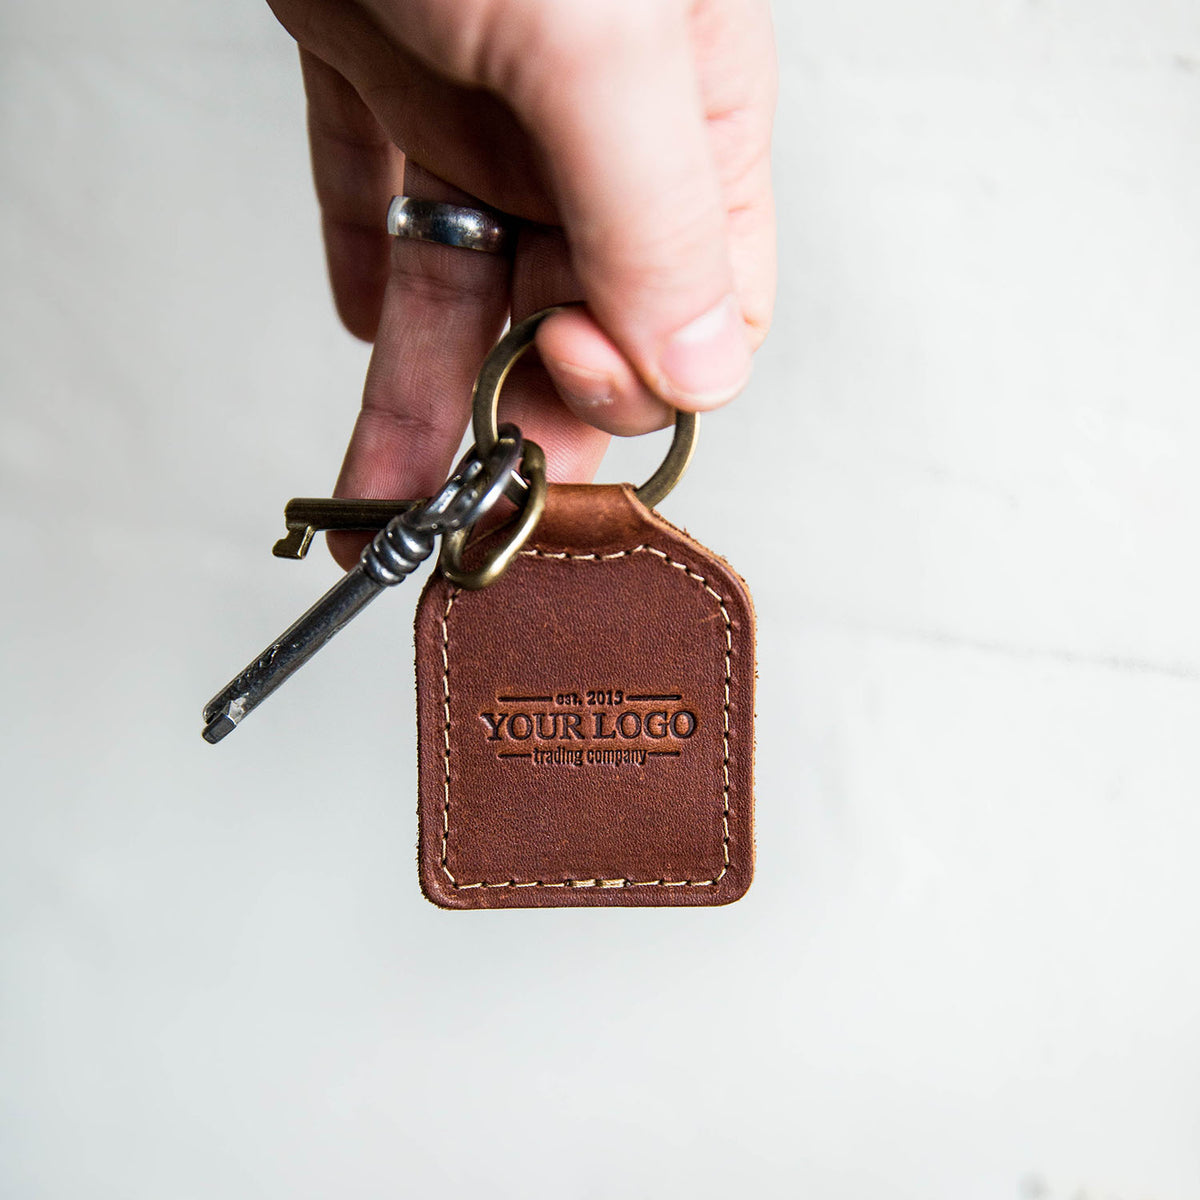 I made a leather keychain with a painting/sculpture technique